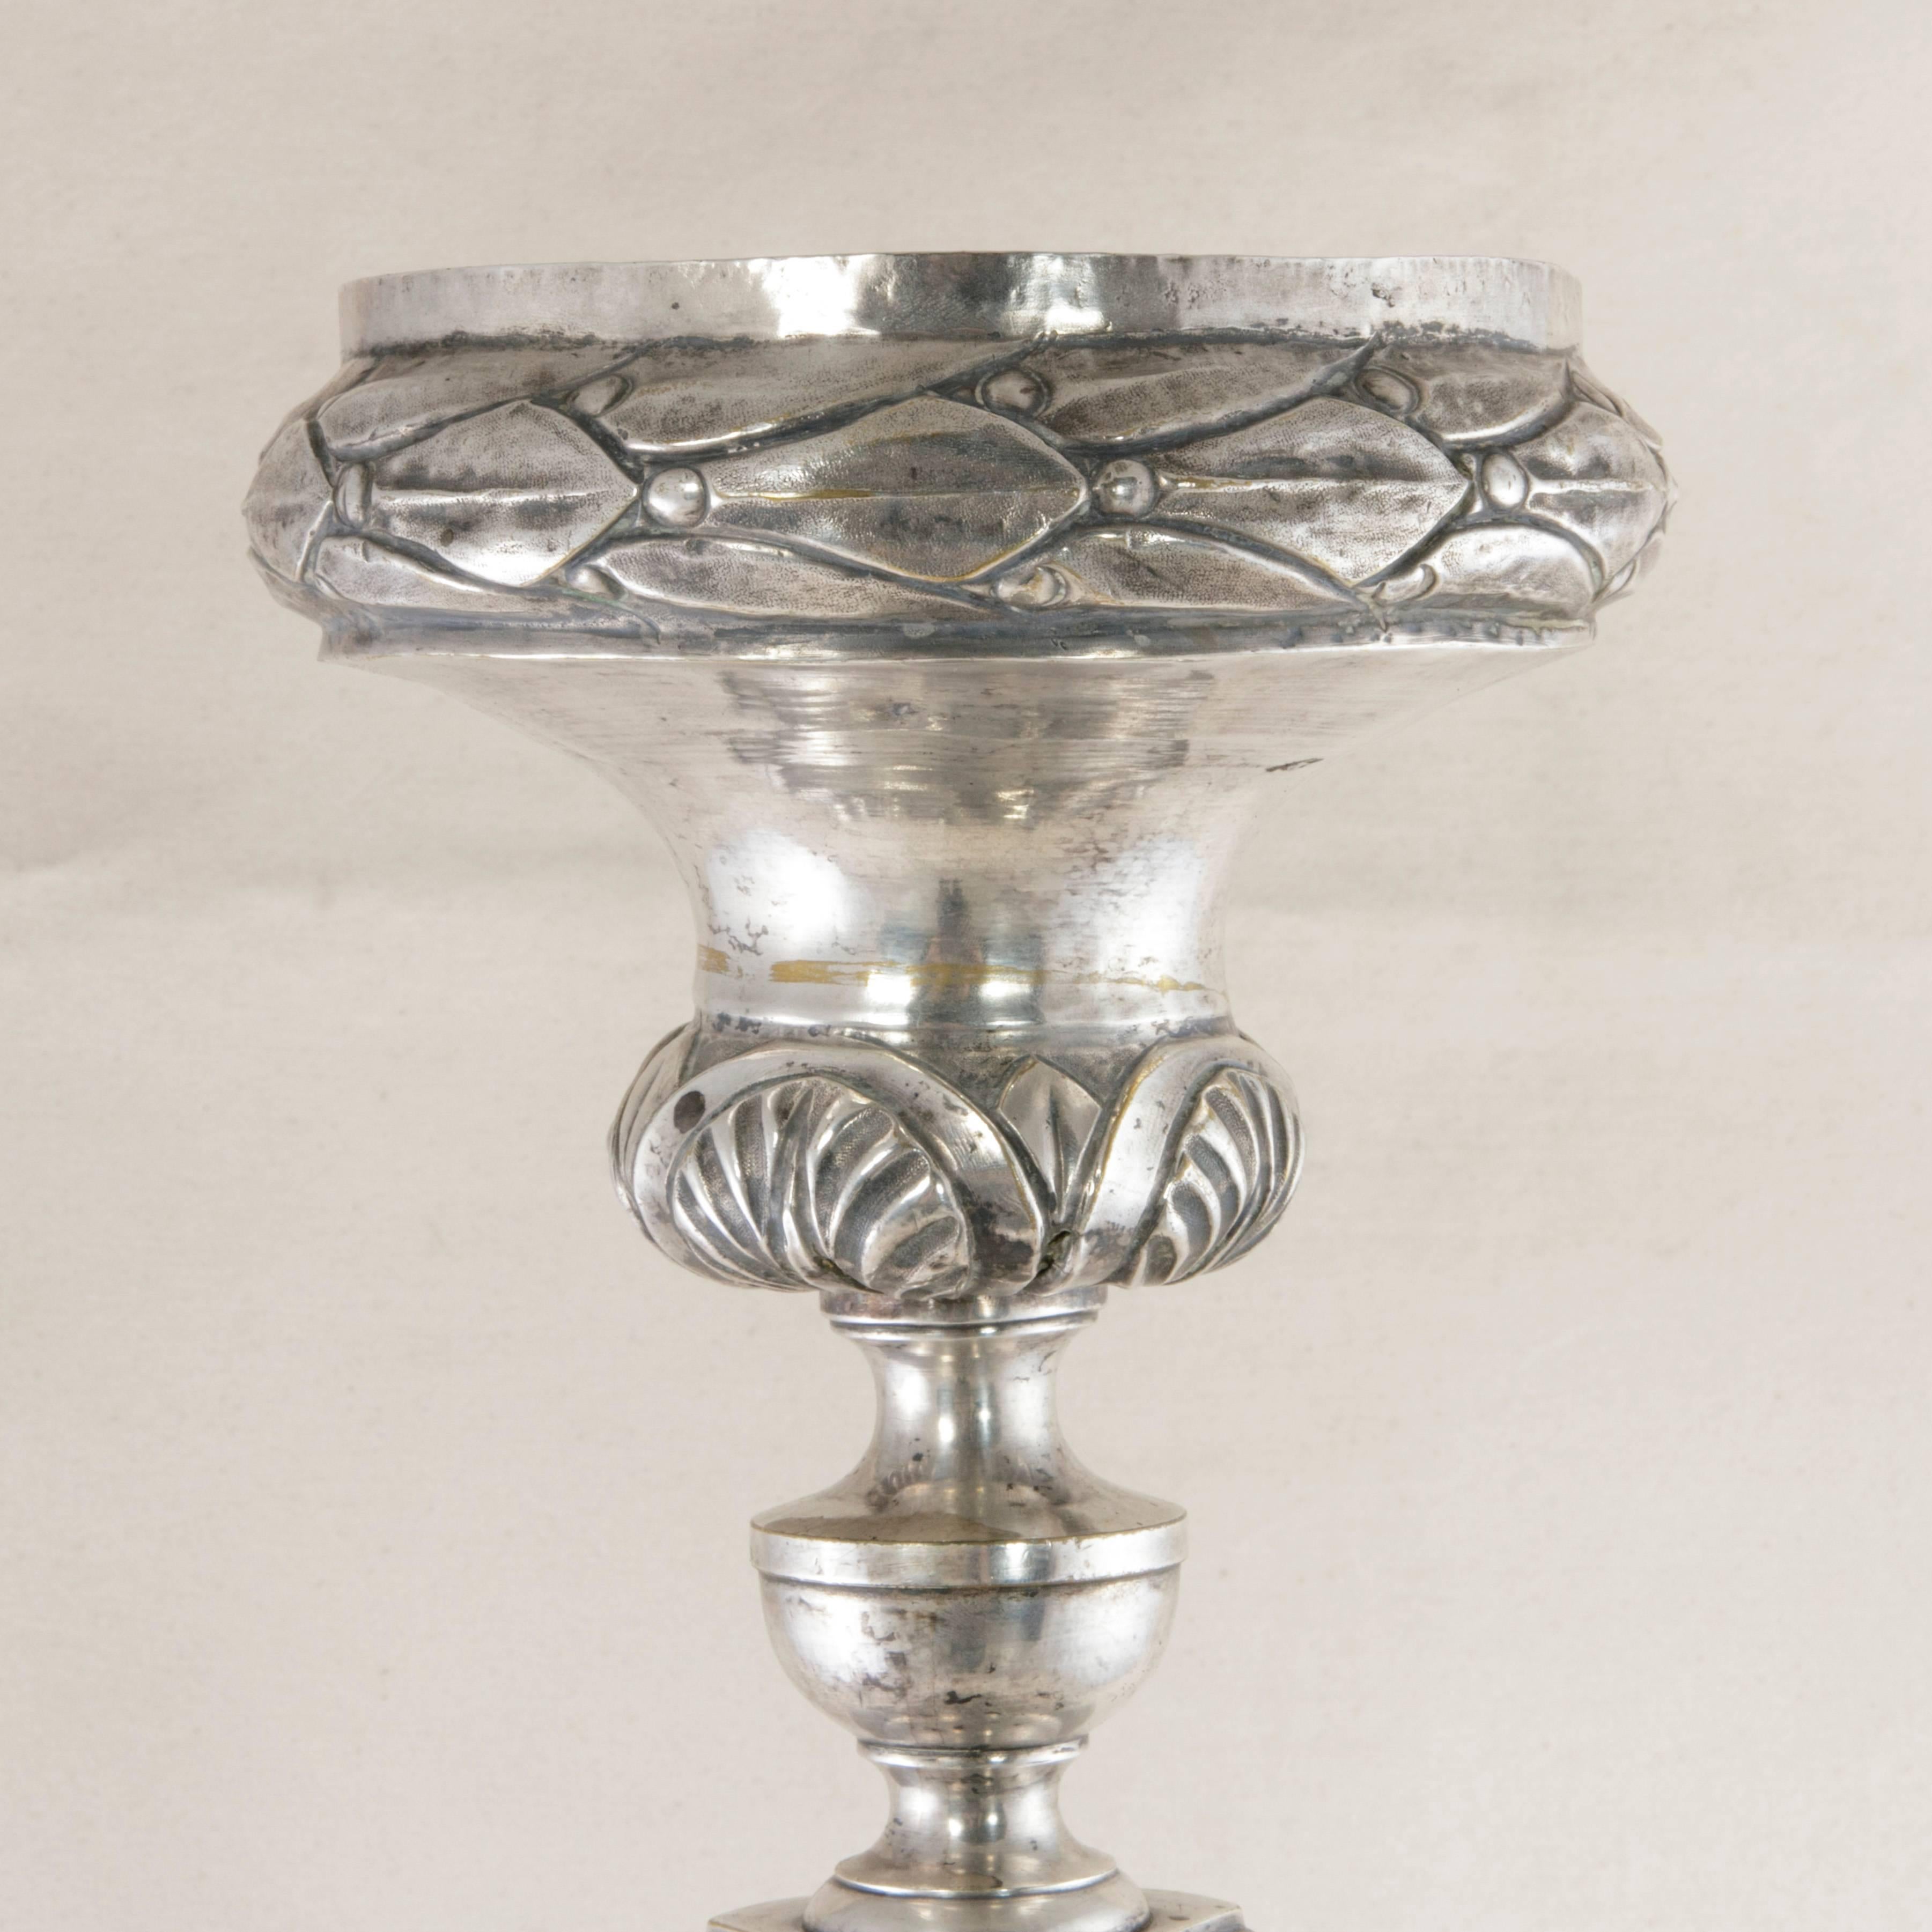 Originally used in a French chapel, this exquisite silver plate repousse pricket or candlestick from the late 19th century stands two and a half feet tall and features intricate detailing of acanthus leaves and laurels, as well as geometric designs,